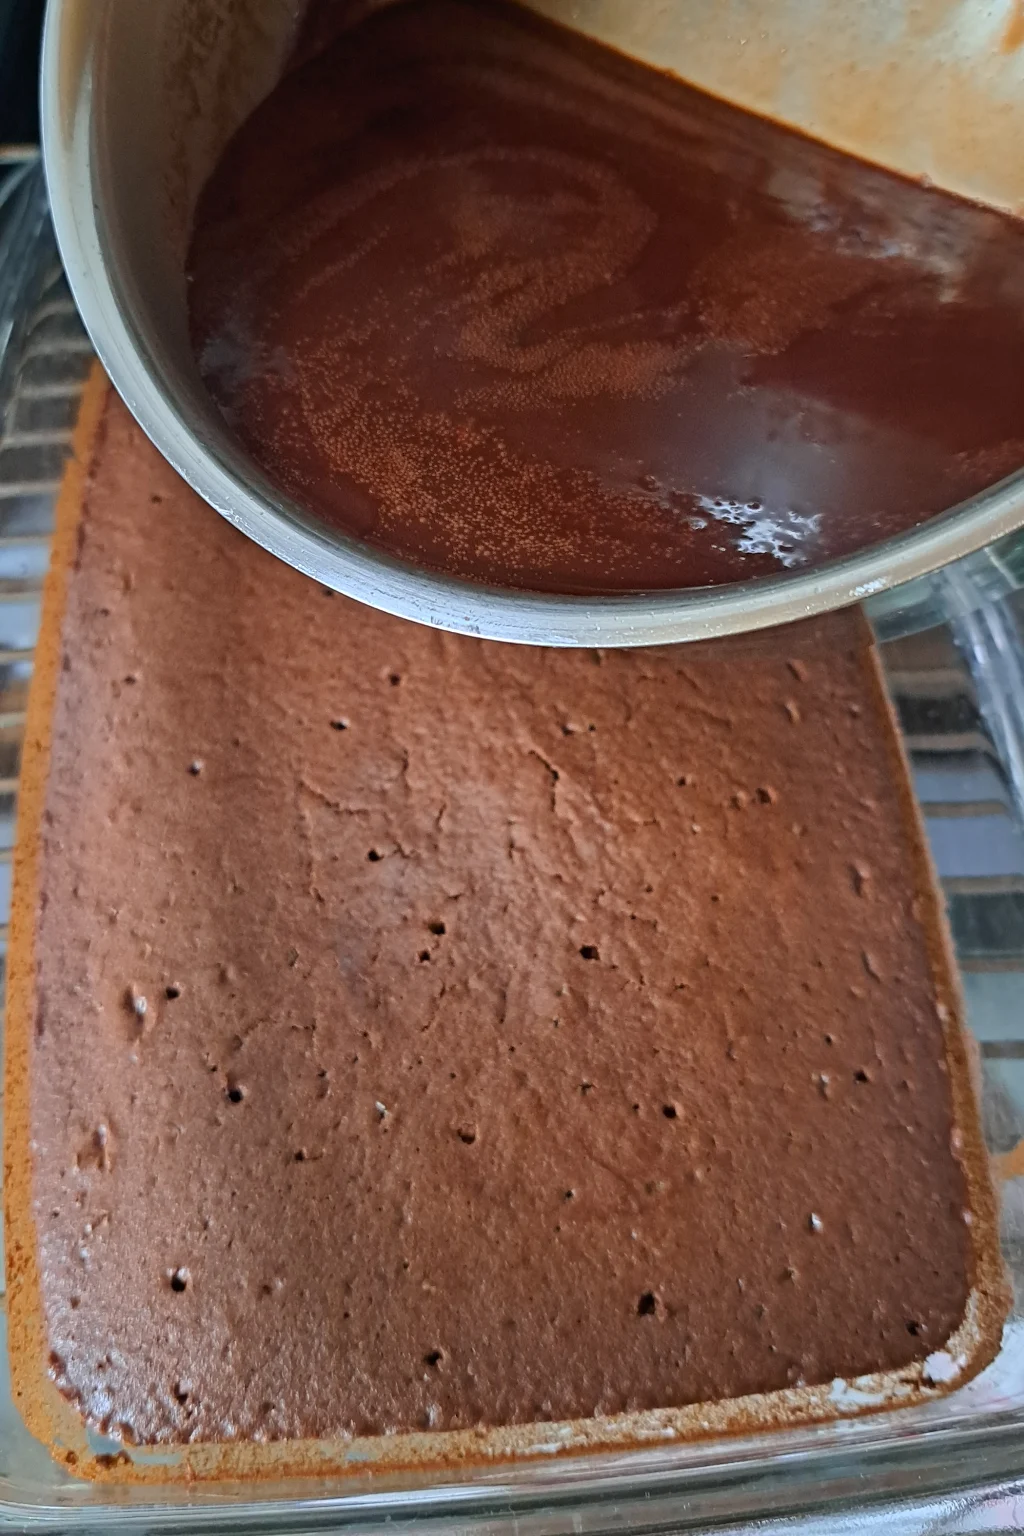 While the cake is still hot, poke holes on the surface of the pudding and pour chocolate Sauce